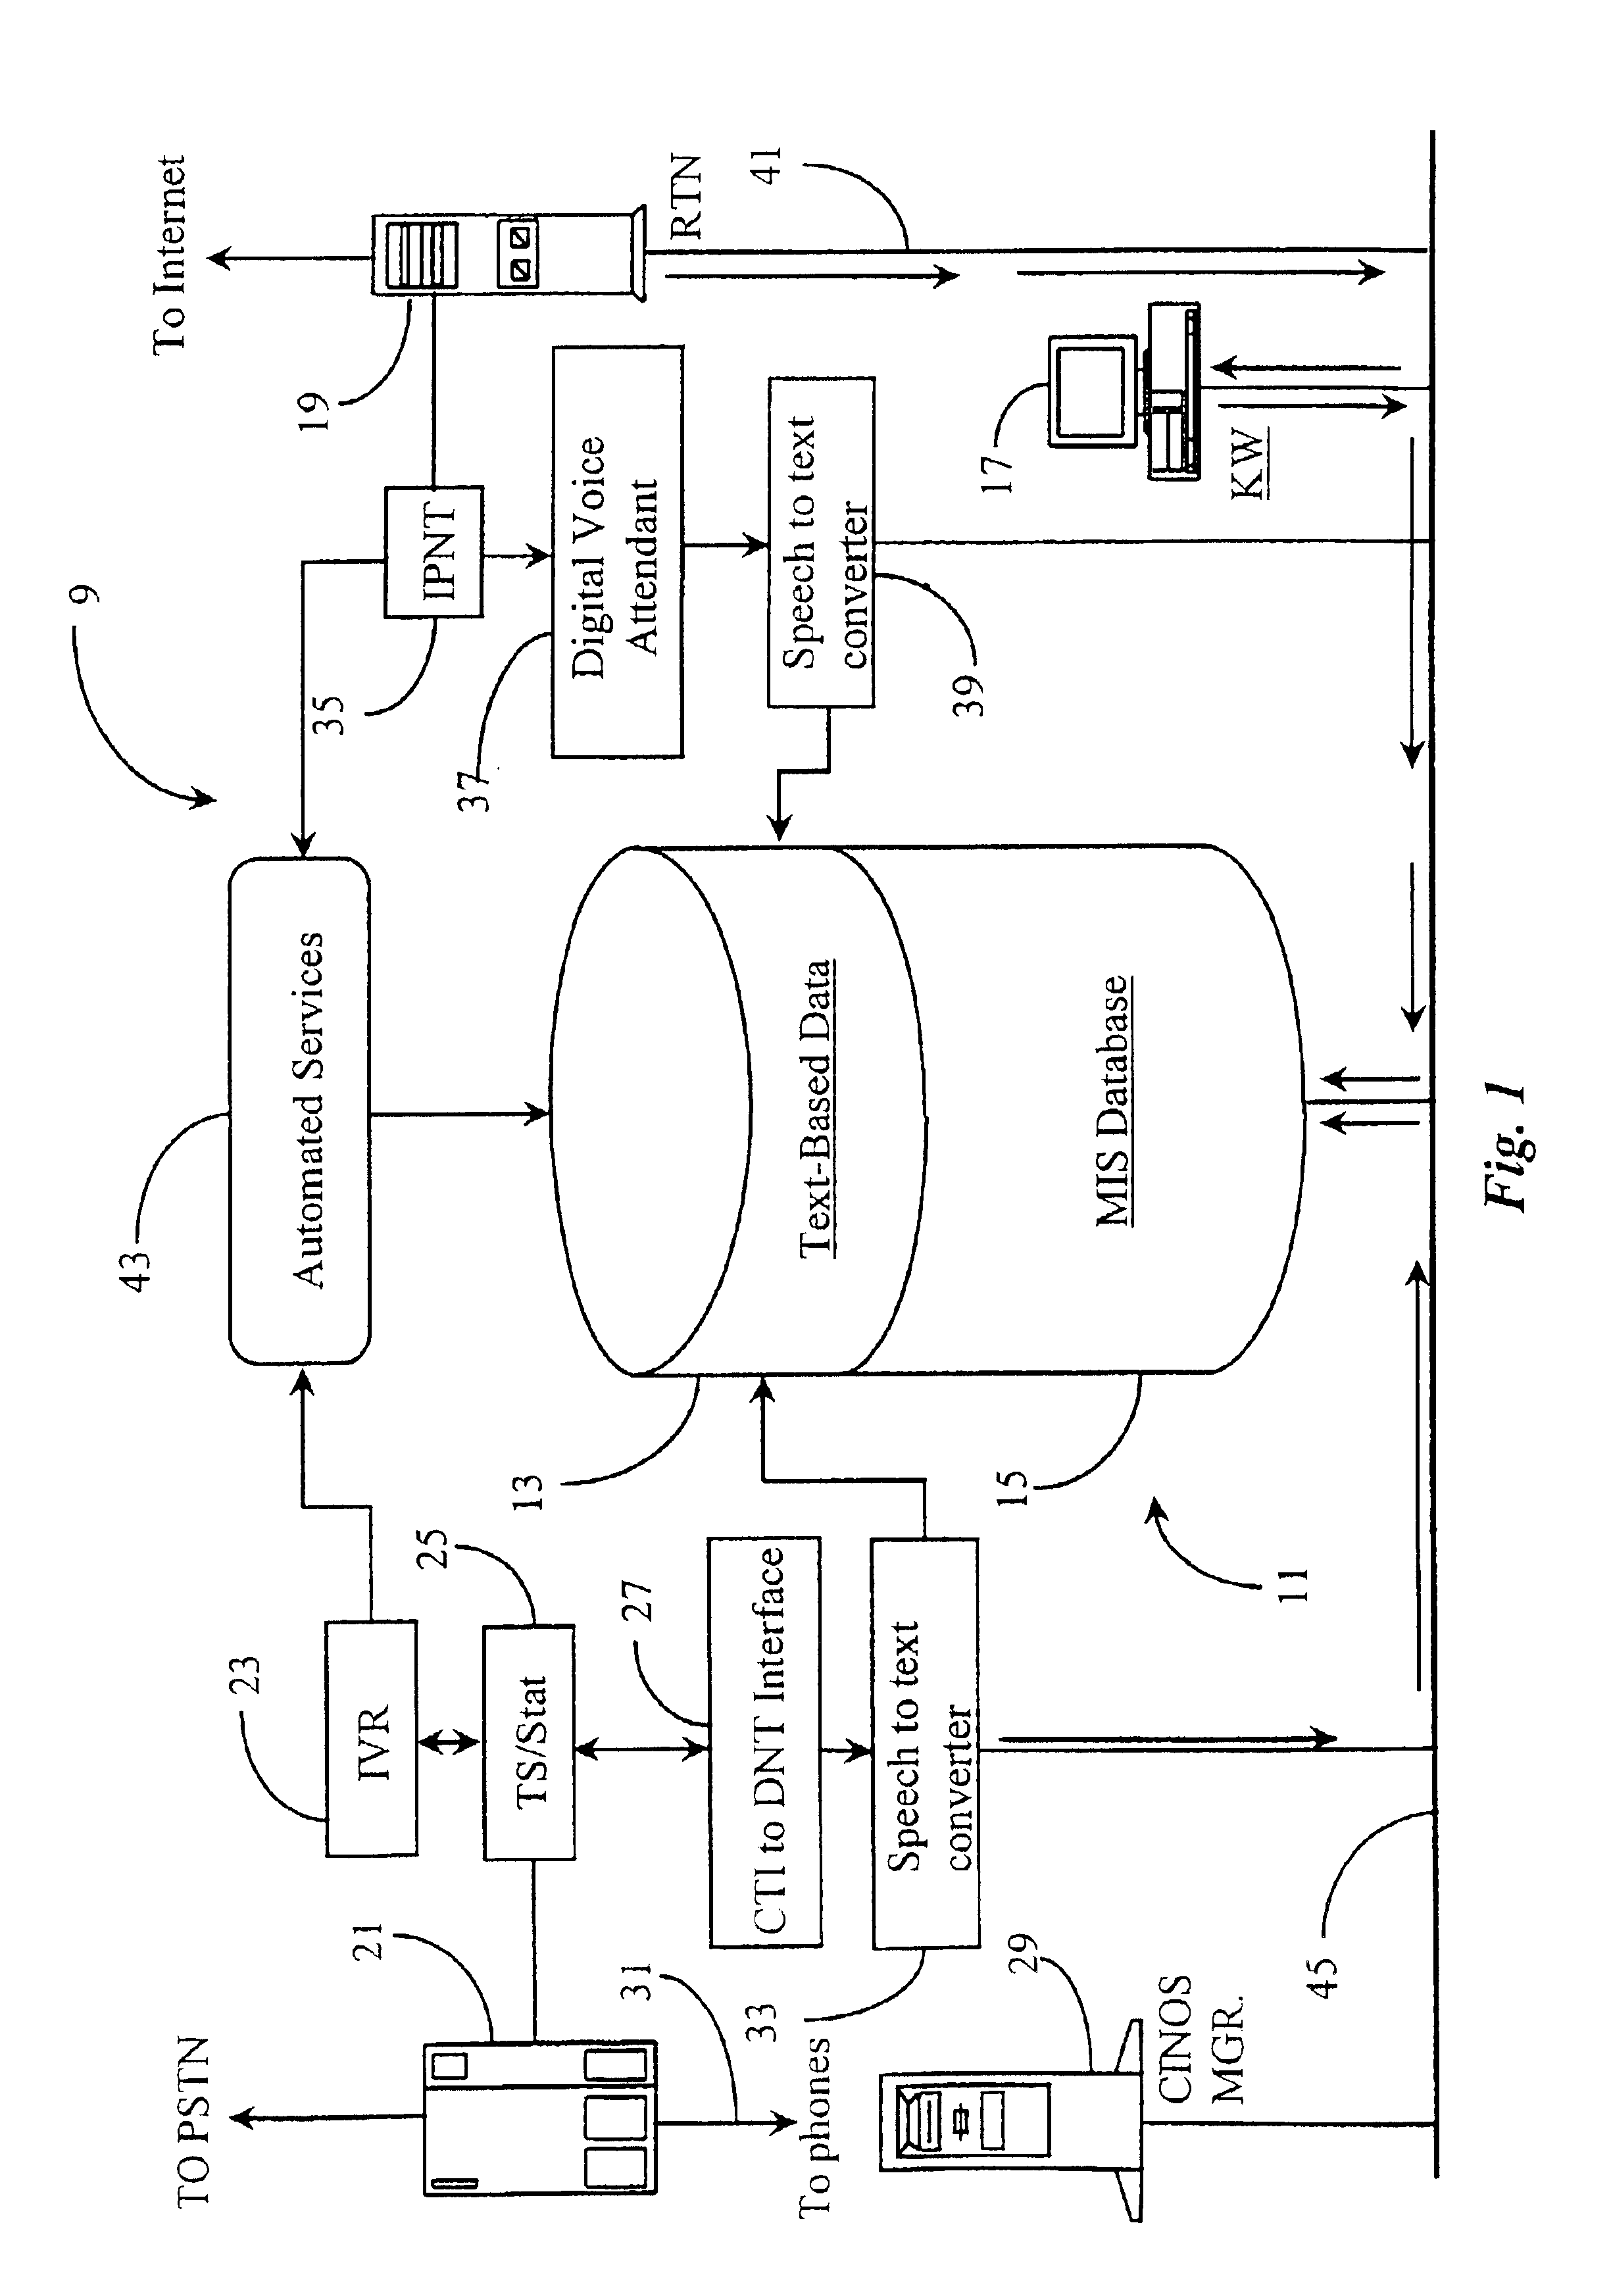 Method and apparatus for extended management of state and interaction of a remote knowledge worker from a contact center